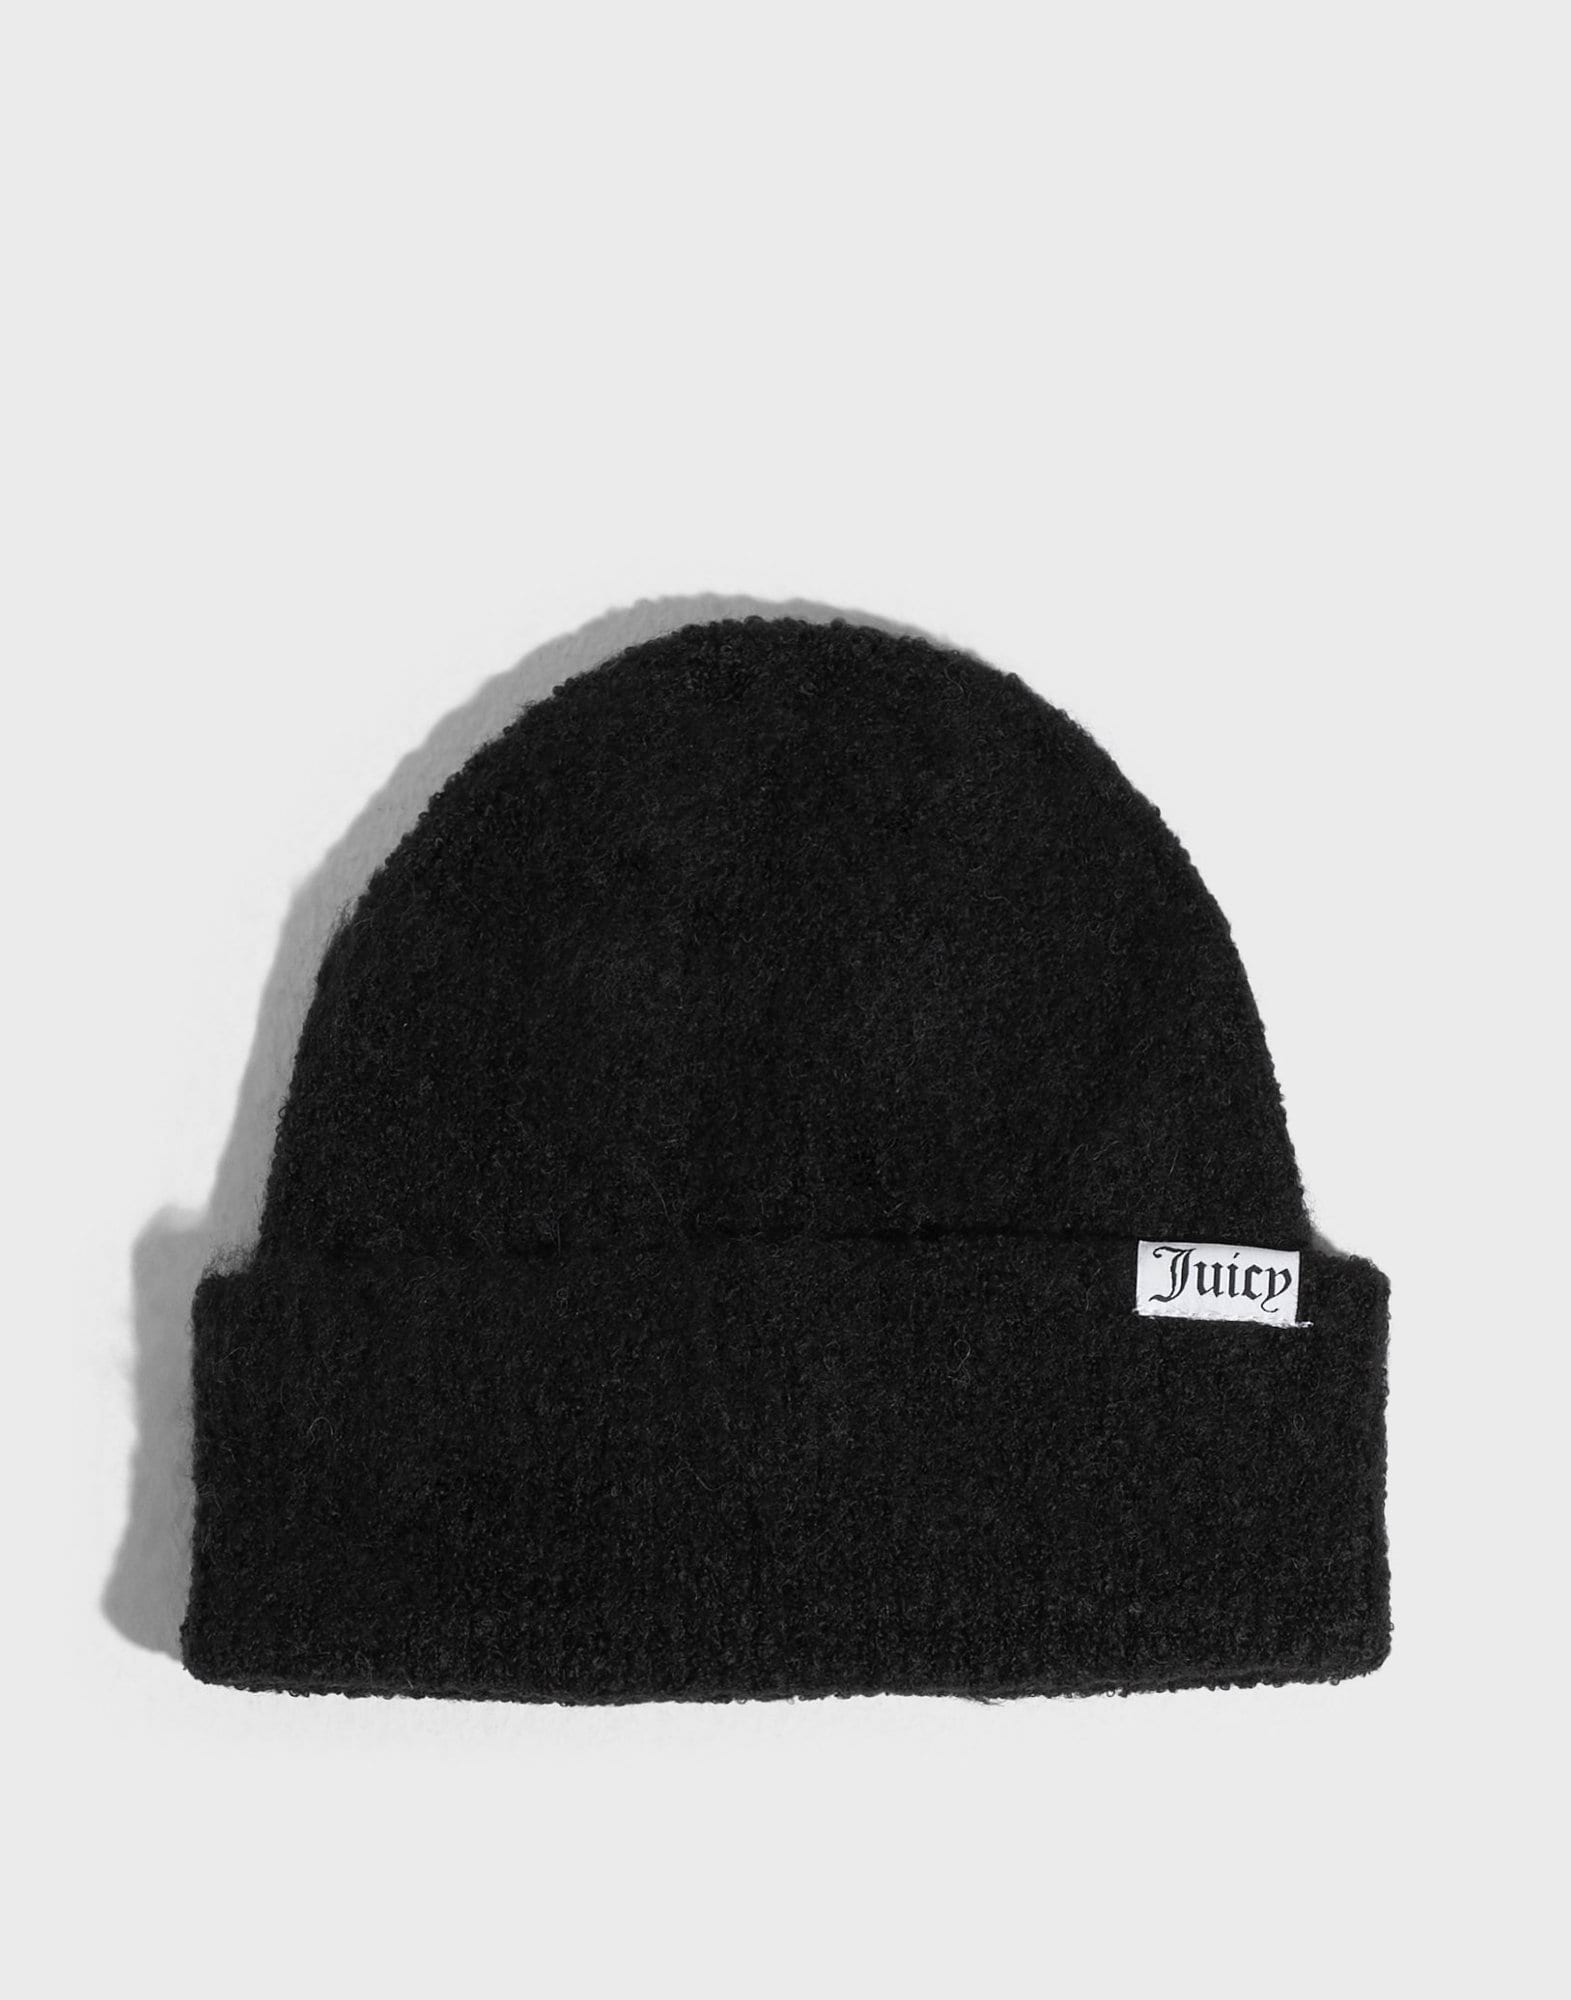 ANVERS KNIT BEANIE